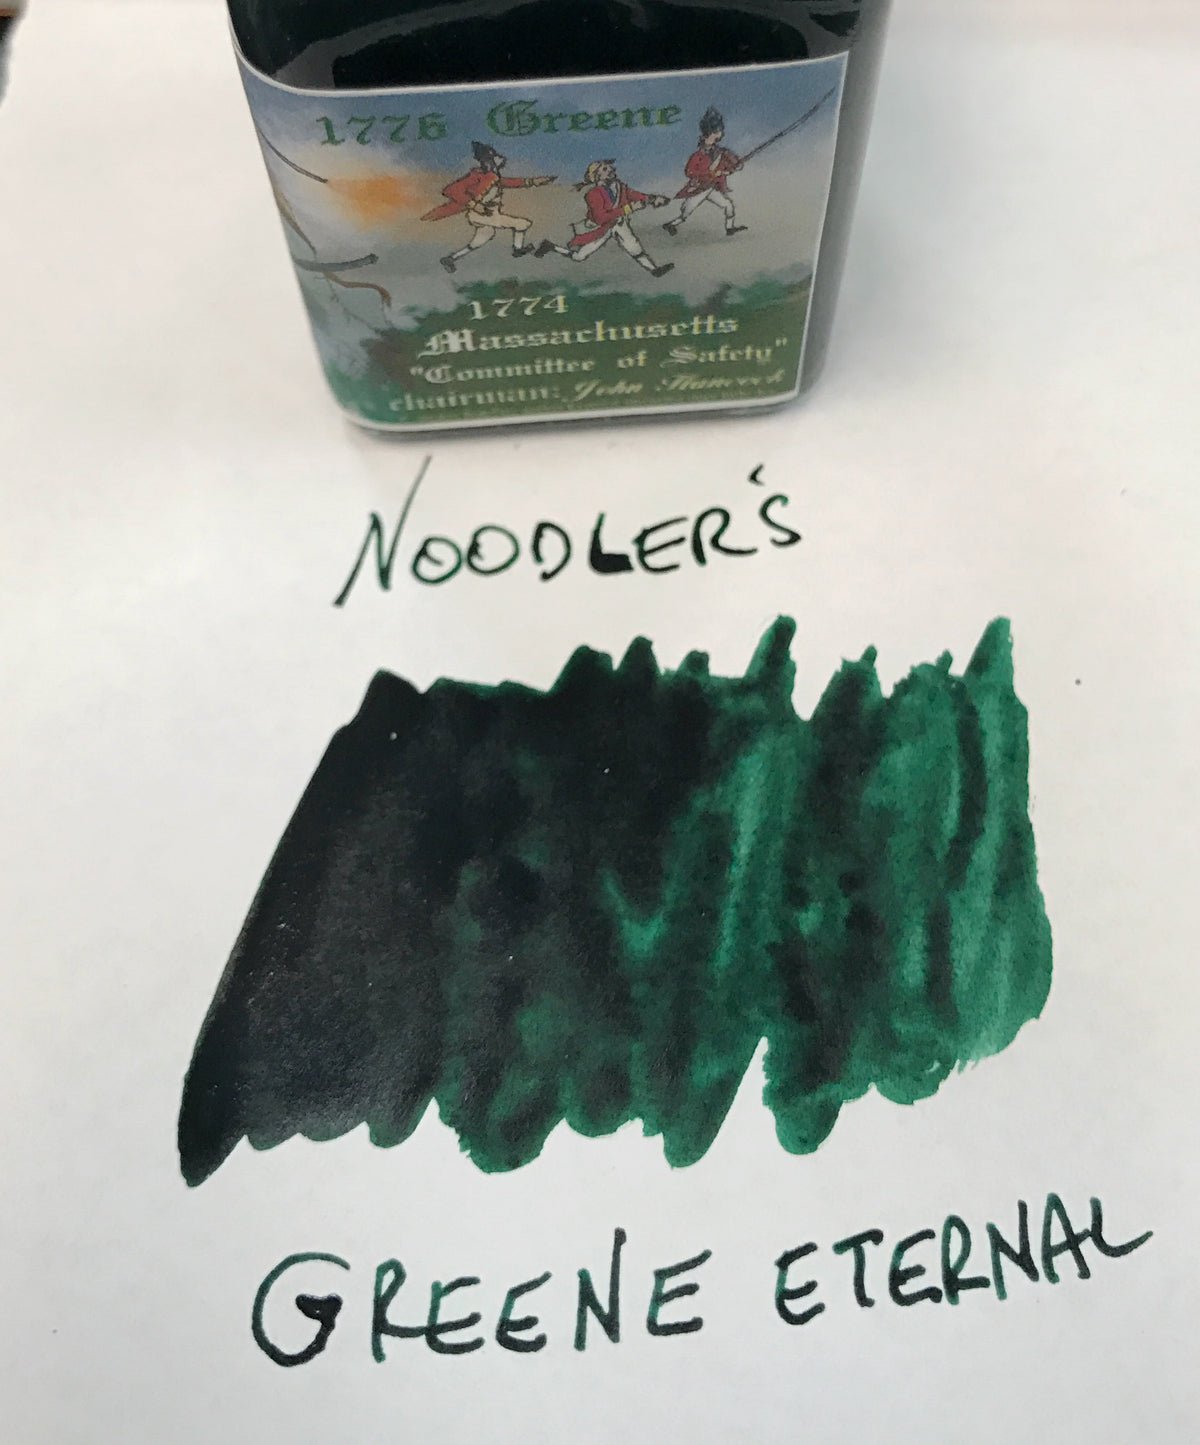 NOT for use with fountain pens.  4.5oz bottle of green bulletproof ink from Noodler's, made in USA.  A water based bonded ink without any alcohol solvents - nor any gum arabic!  Bonded inks once dry, will resist smearing when covered by watercolors and many other aqueous media.  Shake the bottle for the Patriots and the Hessians will behave obediently in their water column.